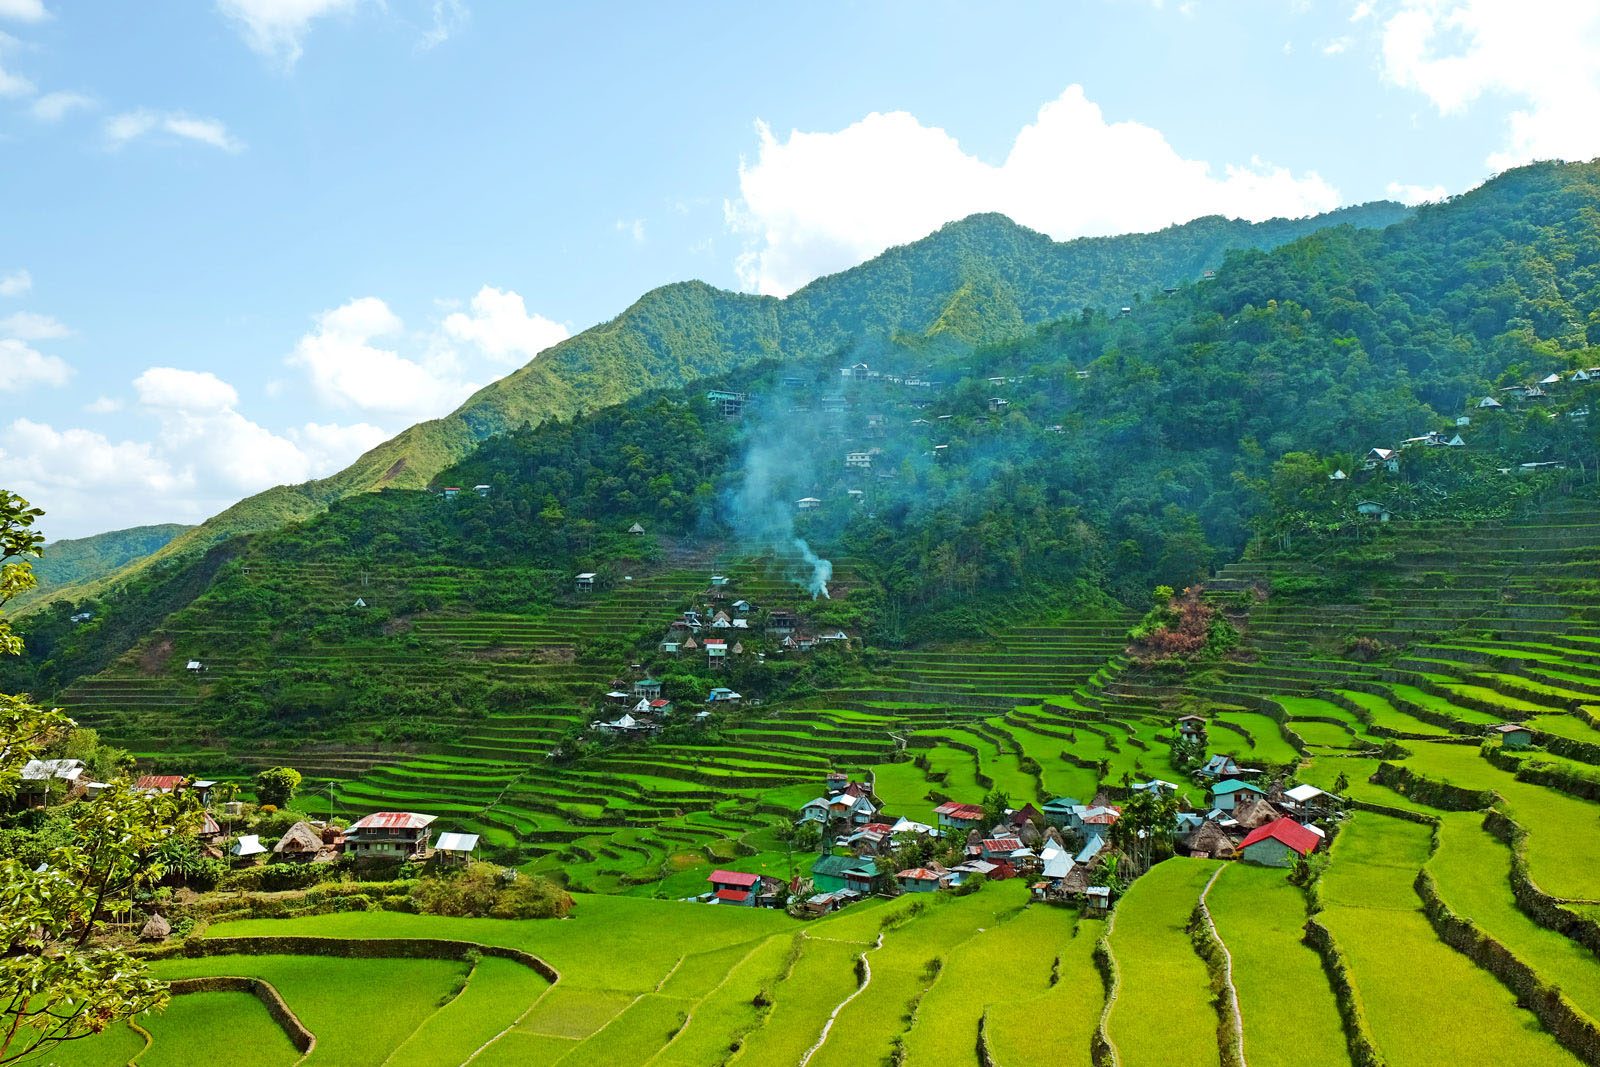 Banaue rice terraces now only 5 hours away from Manila